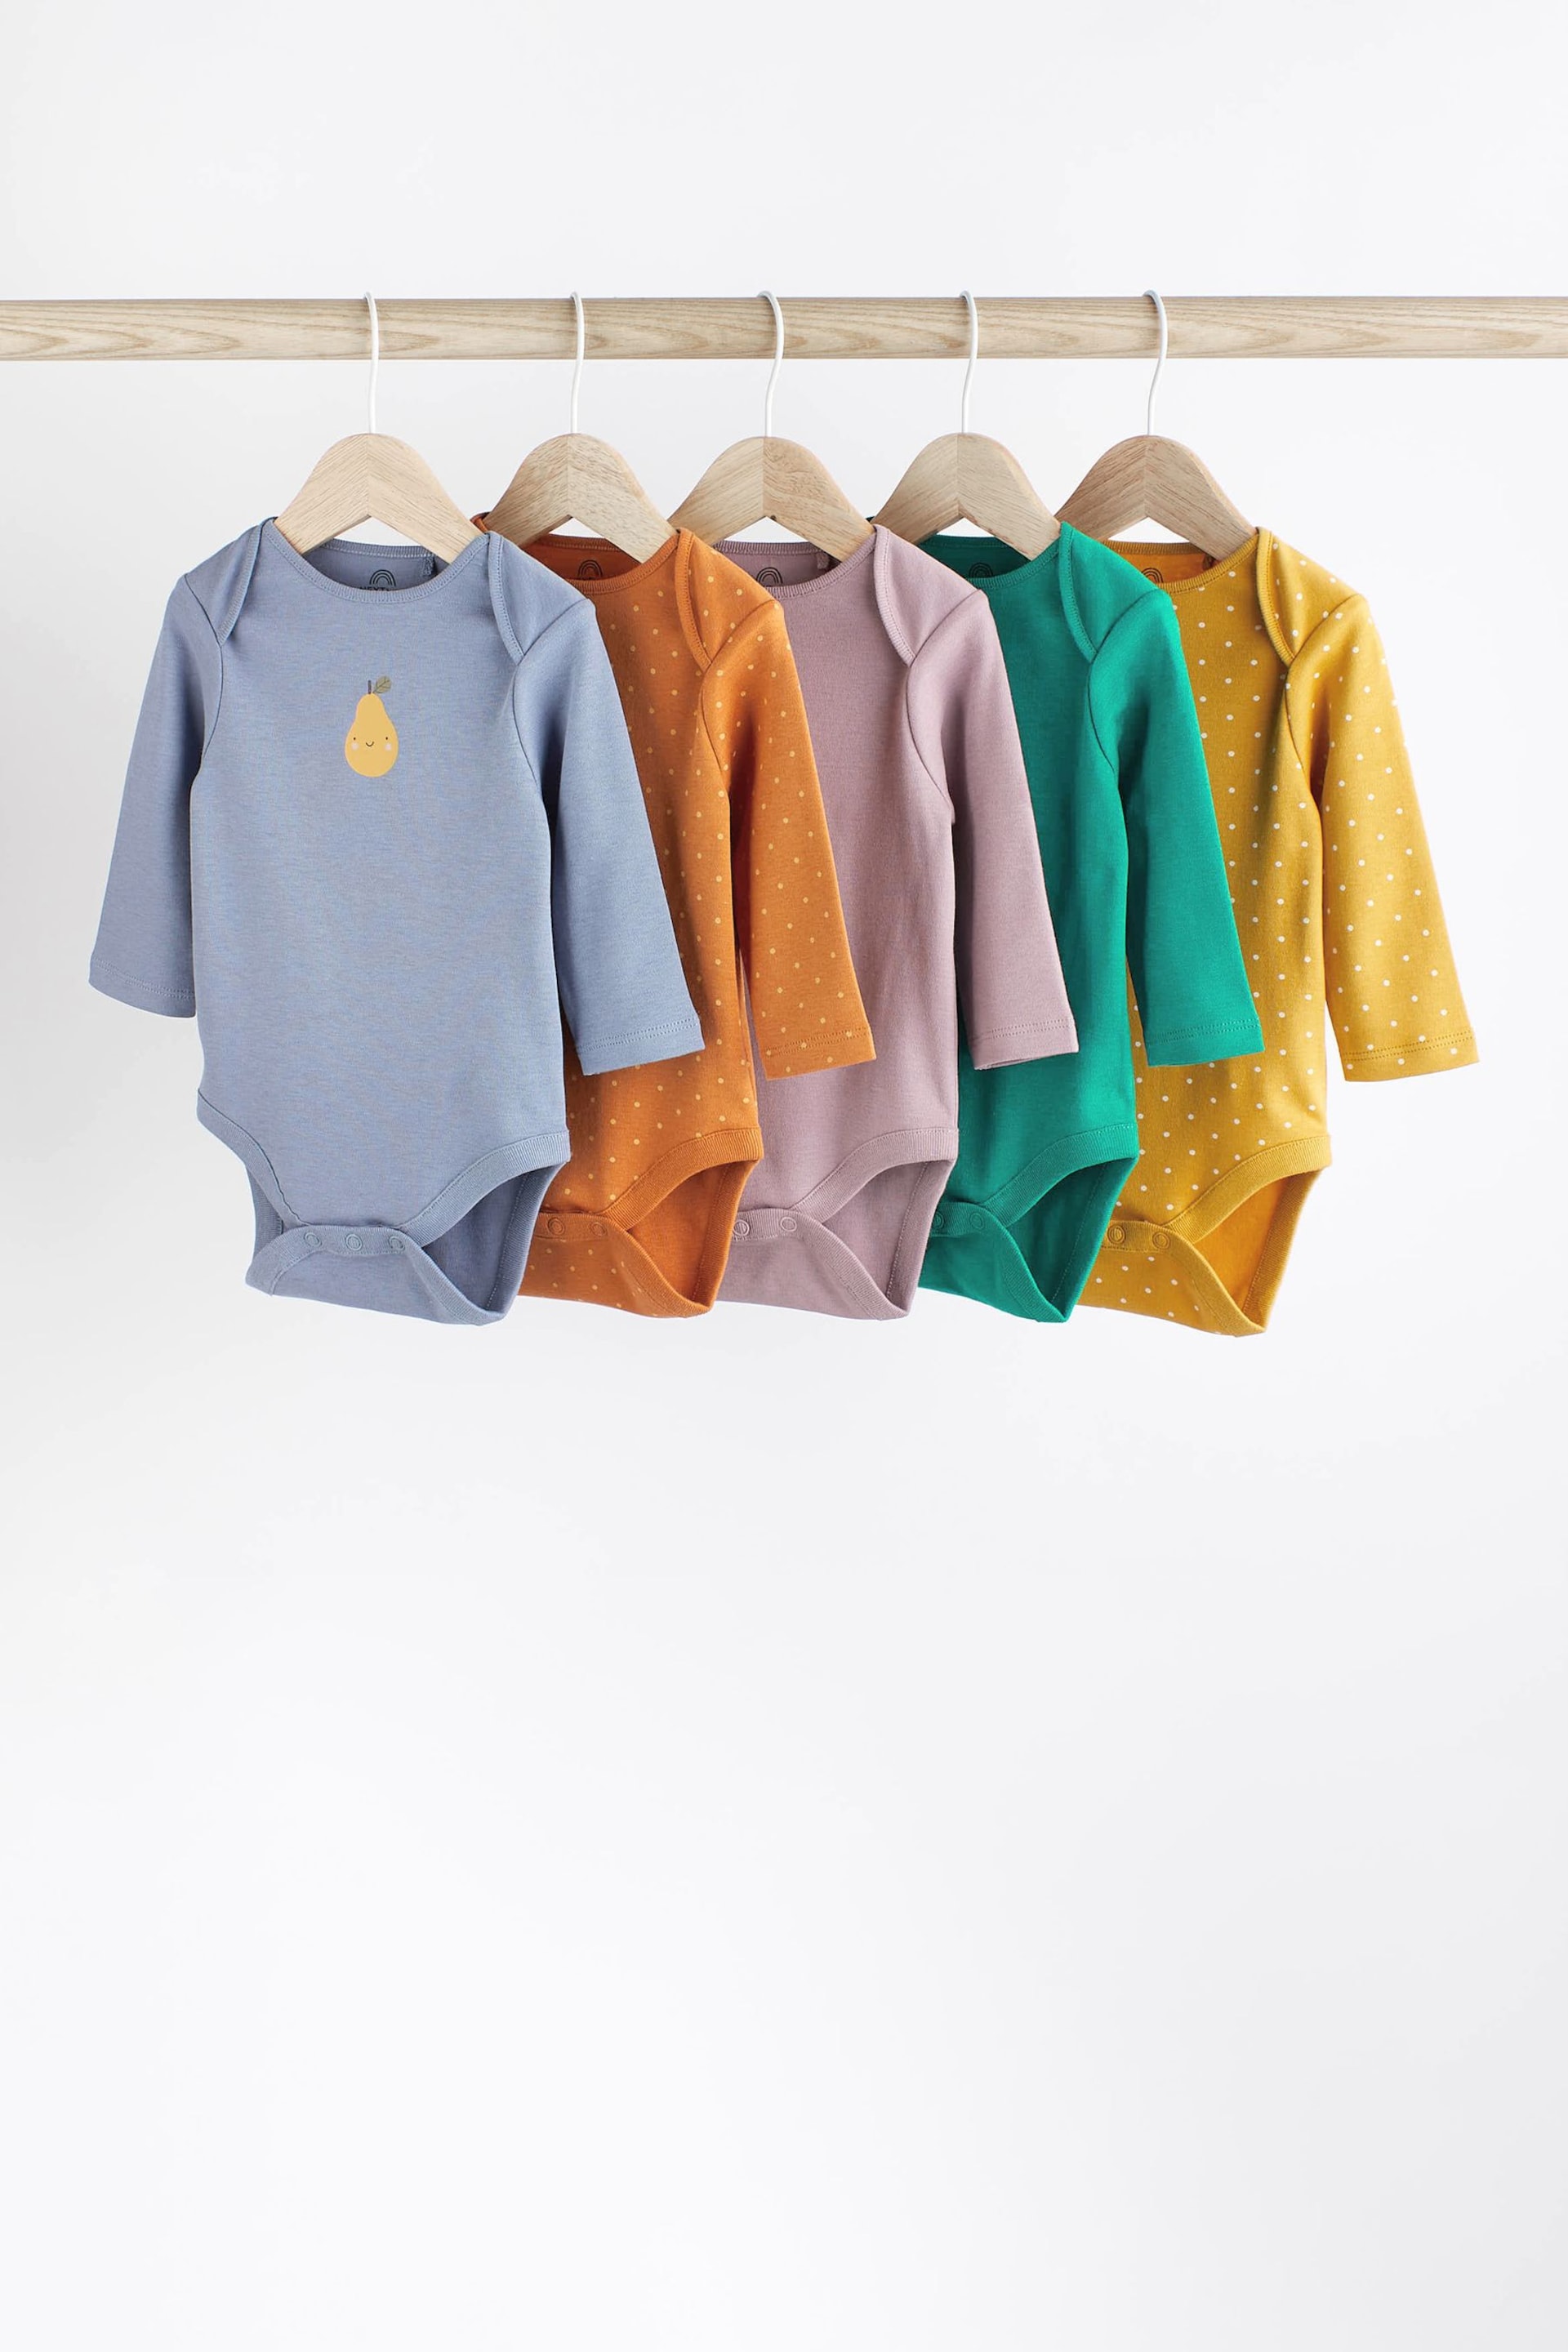 Multi Placement Baby Long Sleeve Bodysuits 5 Pack - Image 1 of 7